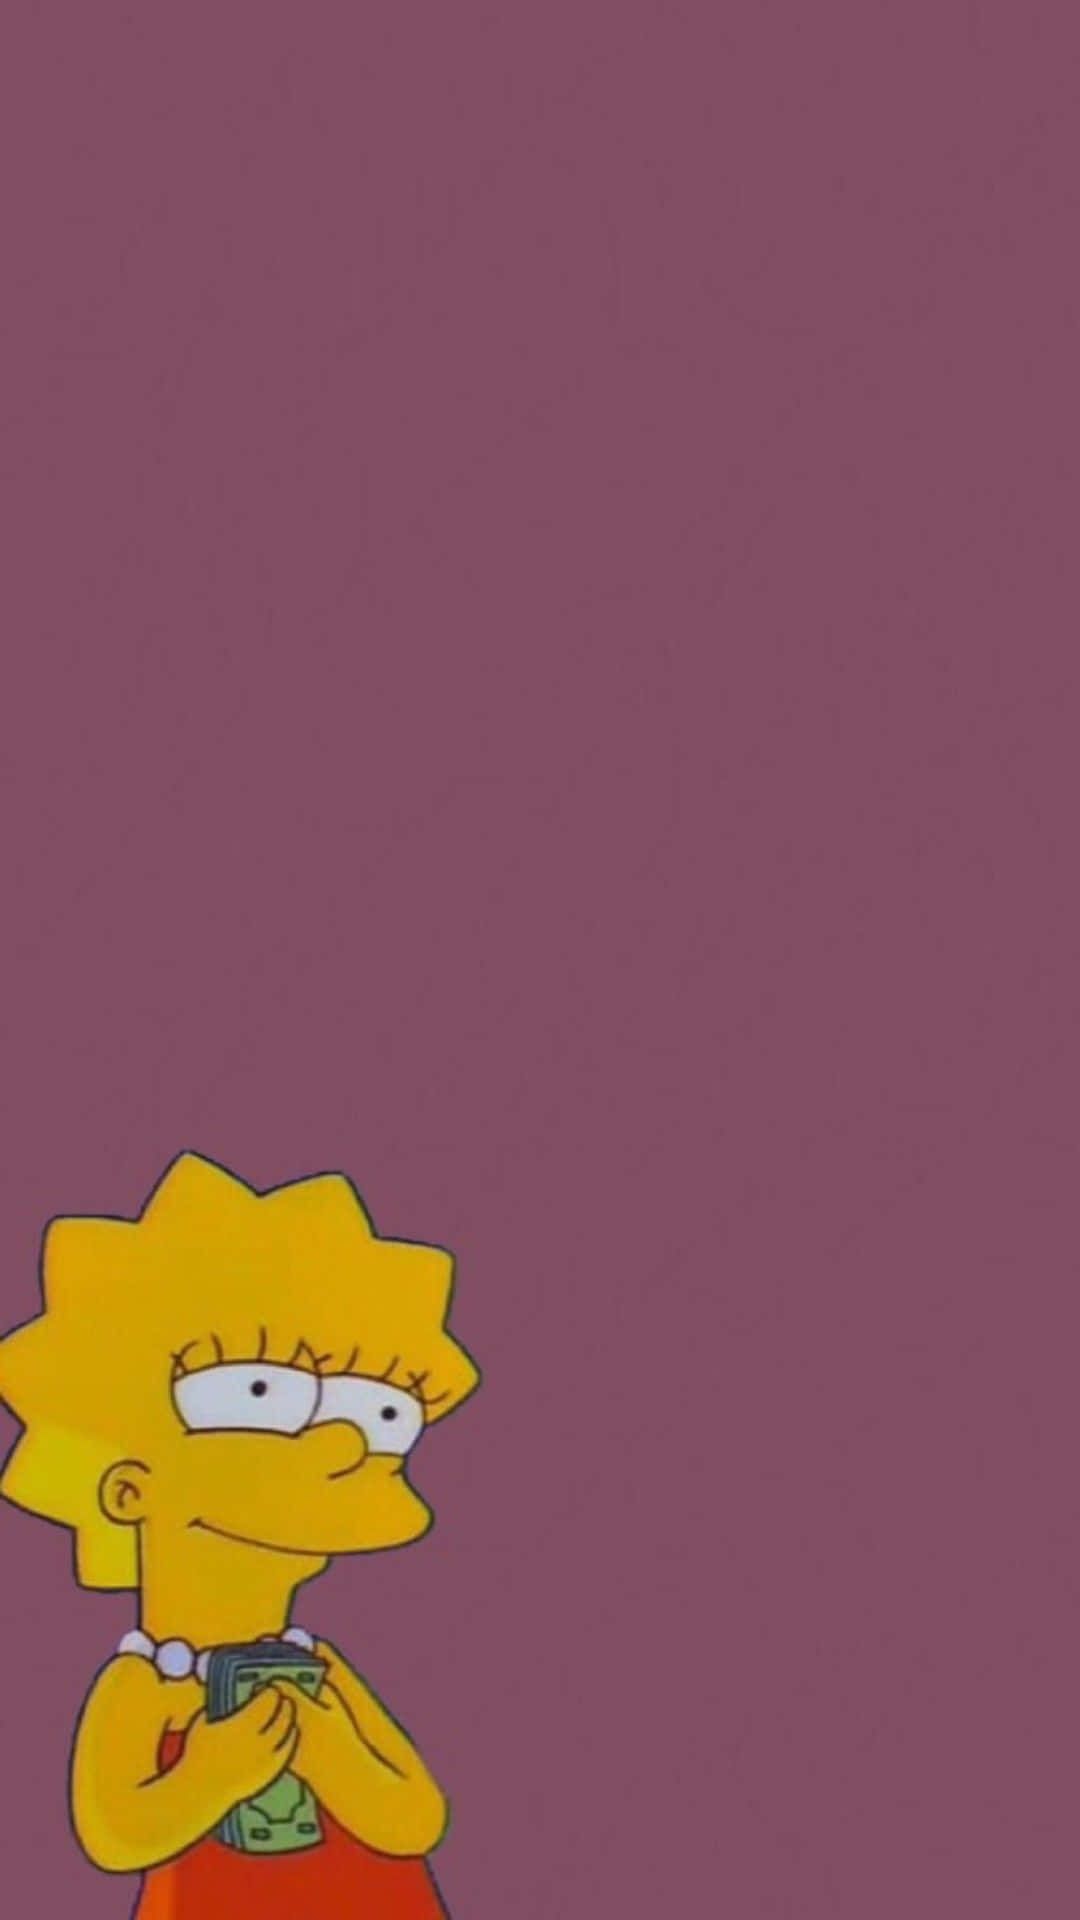 Lisa Simpson Wallpaper iPhone with high-resolution 1080x1920 pixel. You can use this wallpaper for your iPhone 5, 6, 7, 8, X, XS, XR backgrounds, Mobile Screensaver, or iPad Lock Screen - The Simpsons